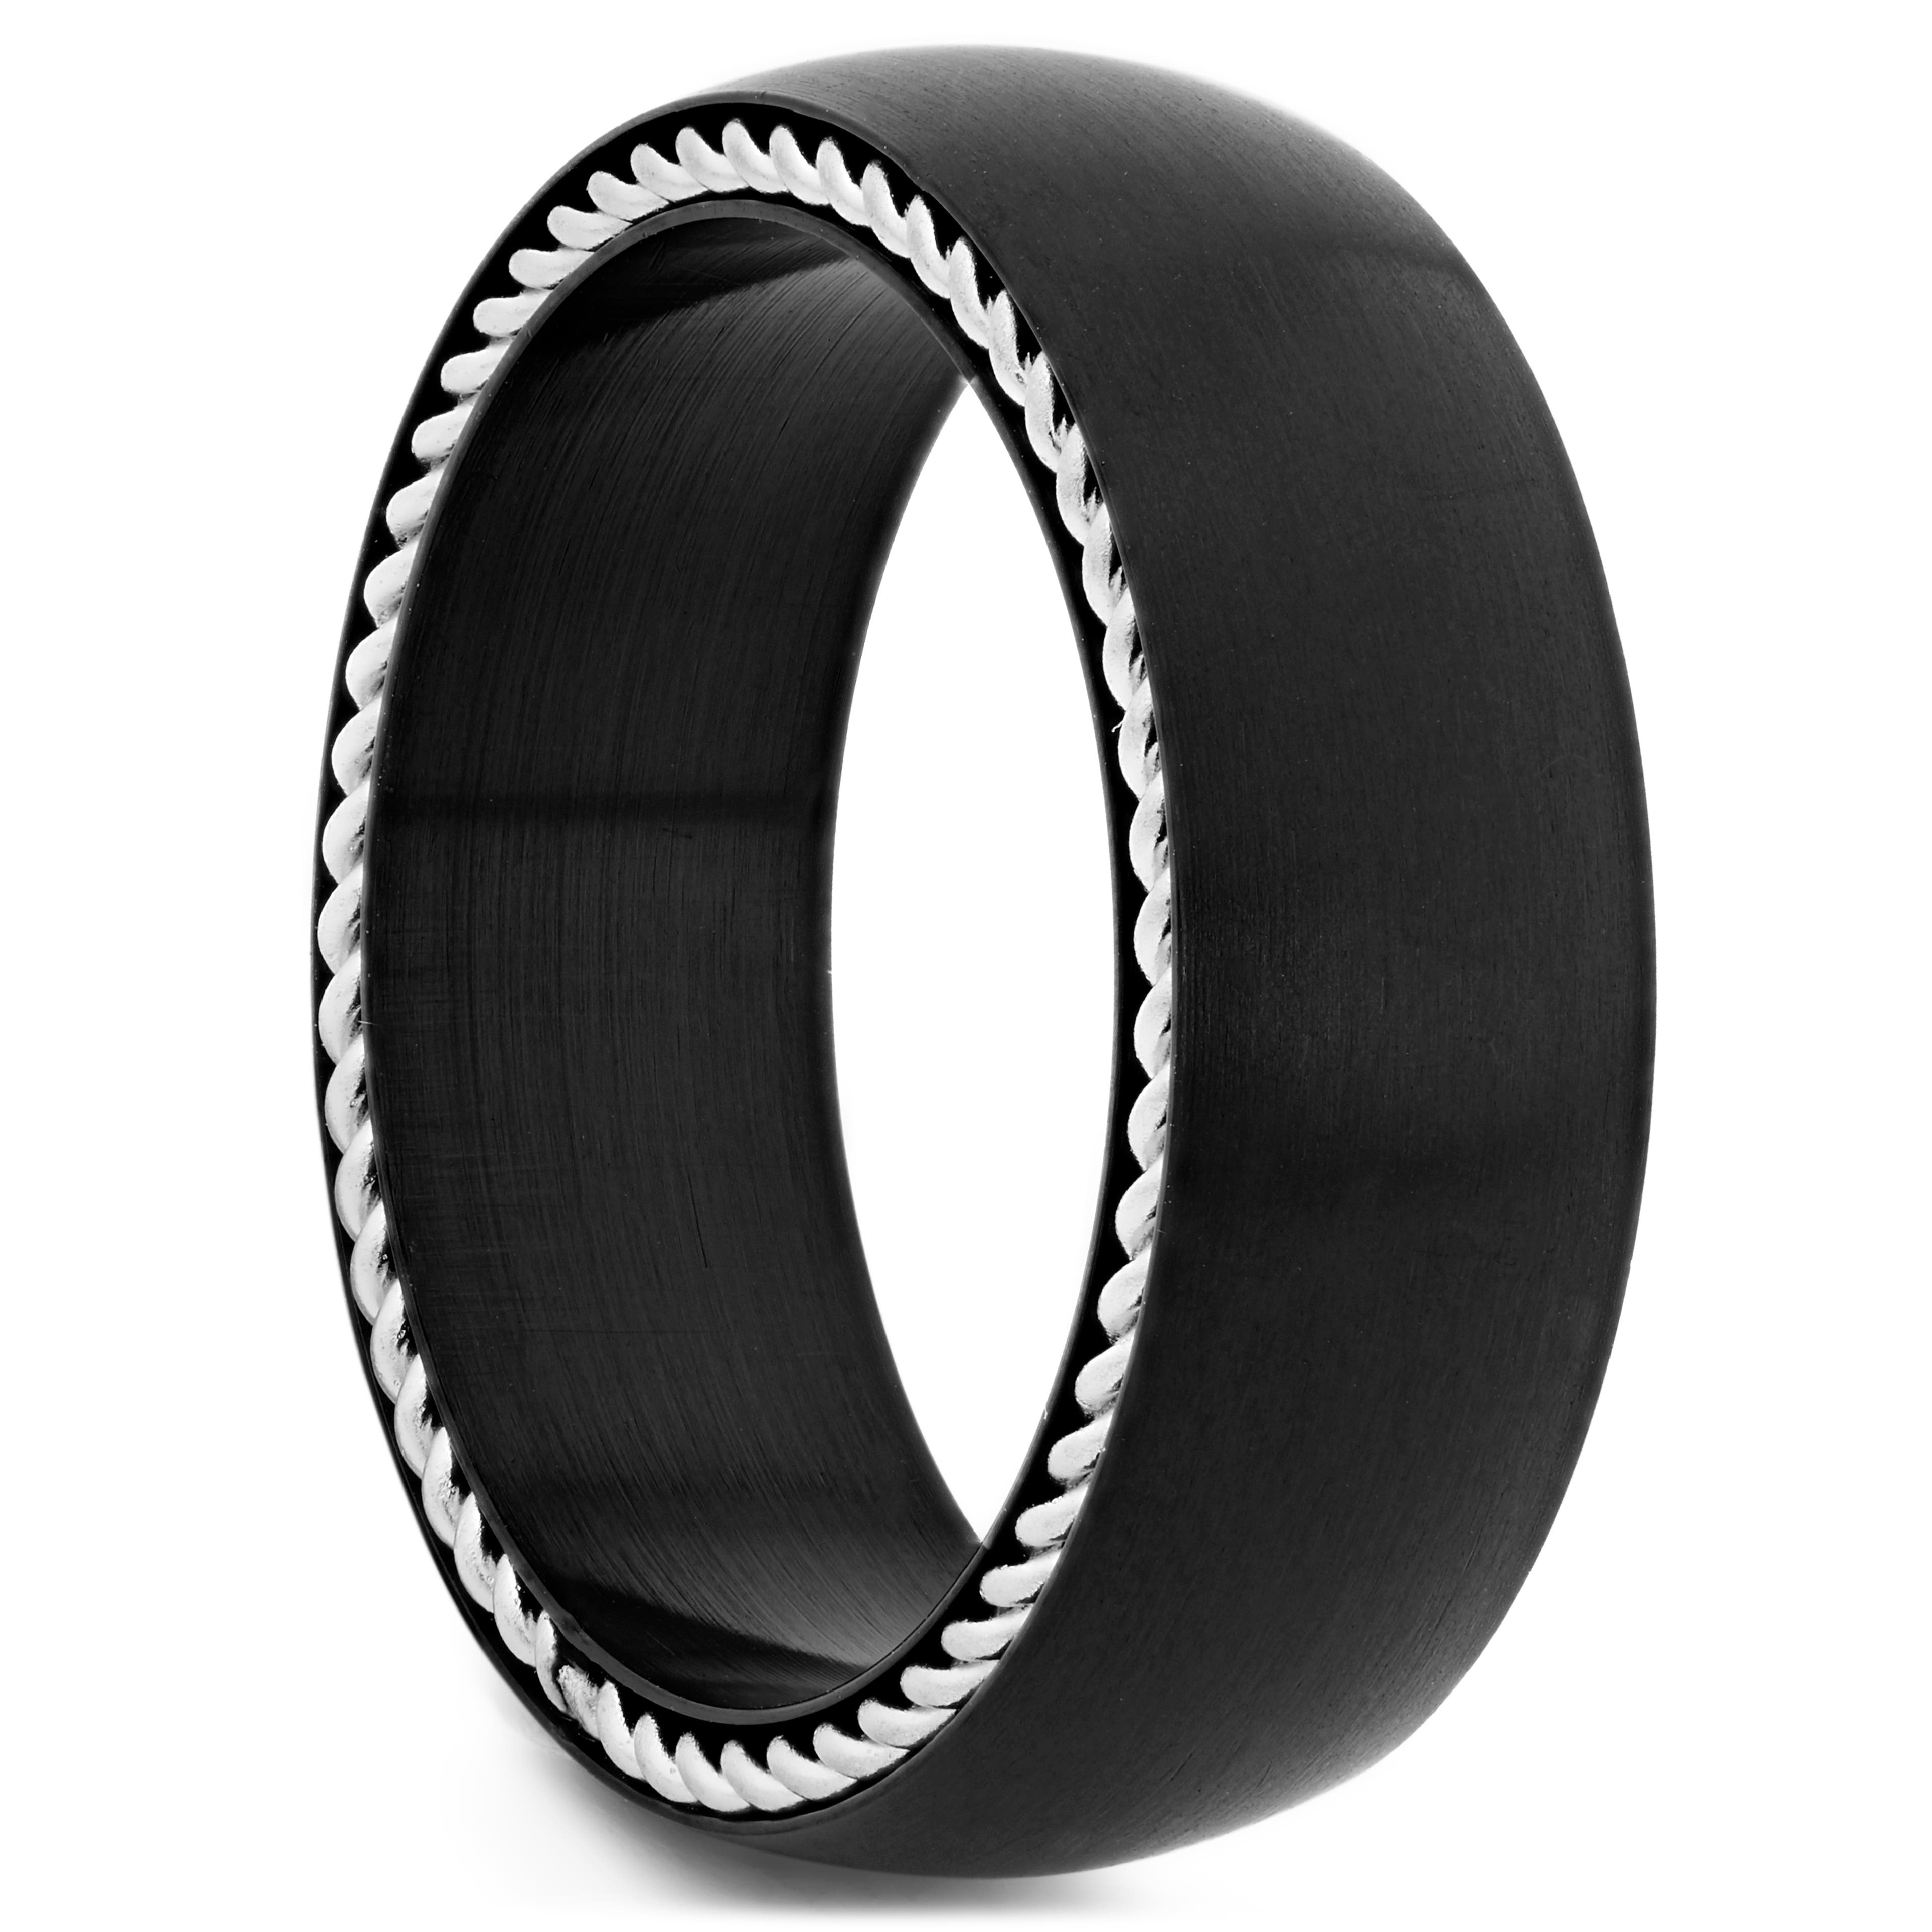 Sentio | Black Stainless Steel Inlaid Wire Ring